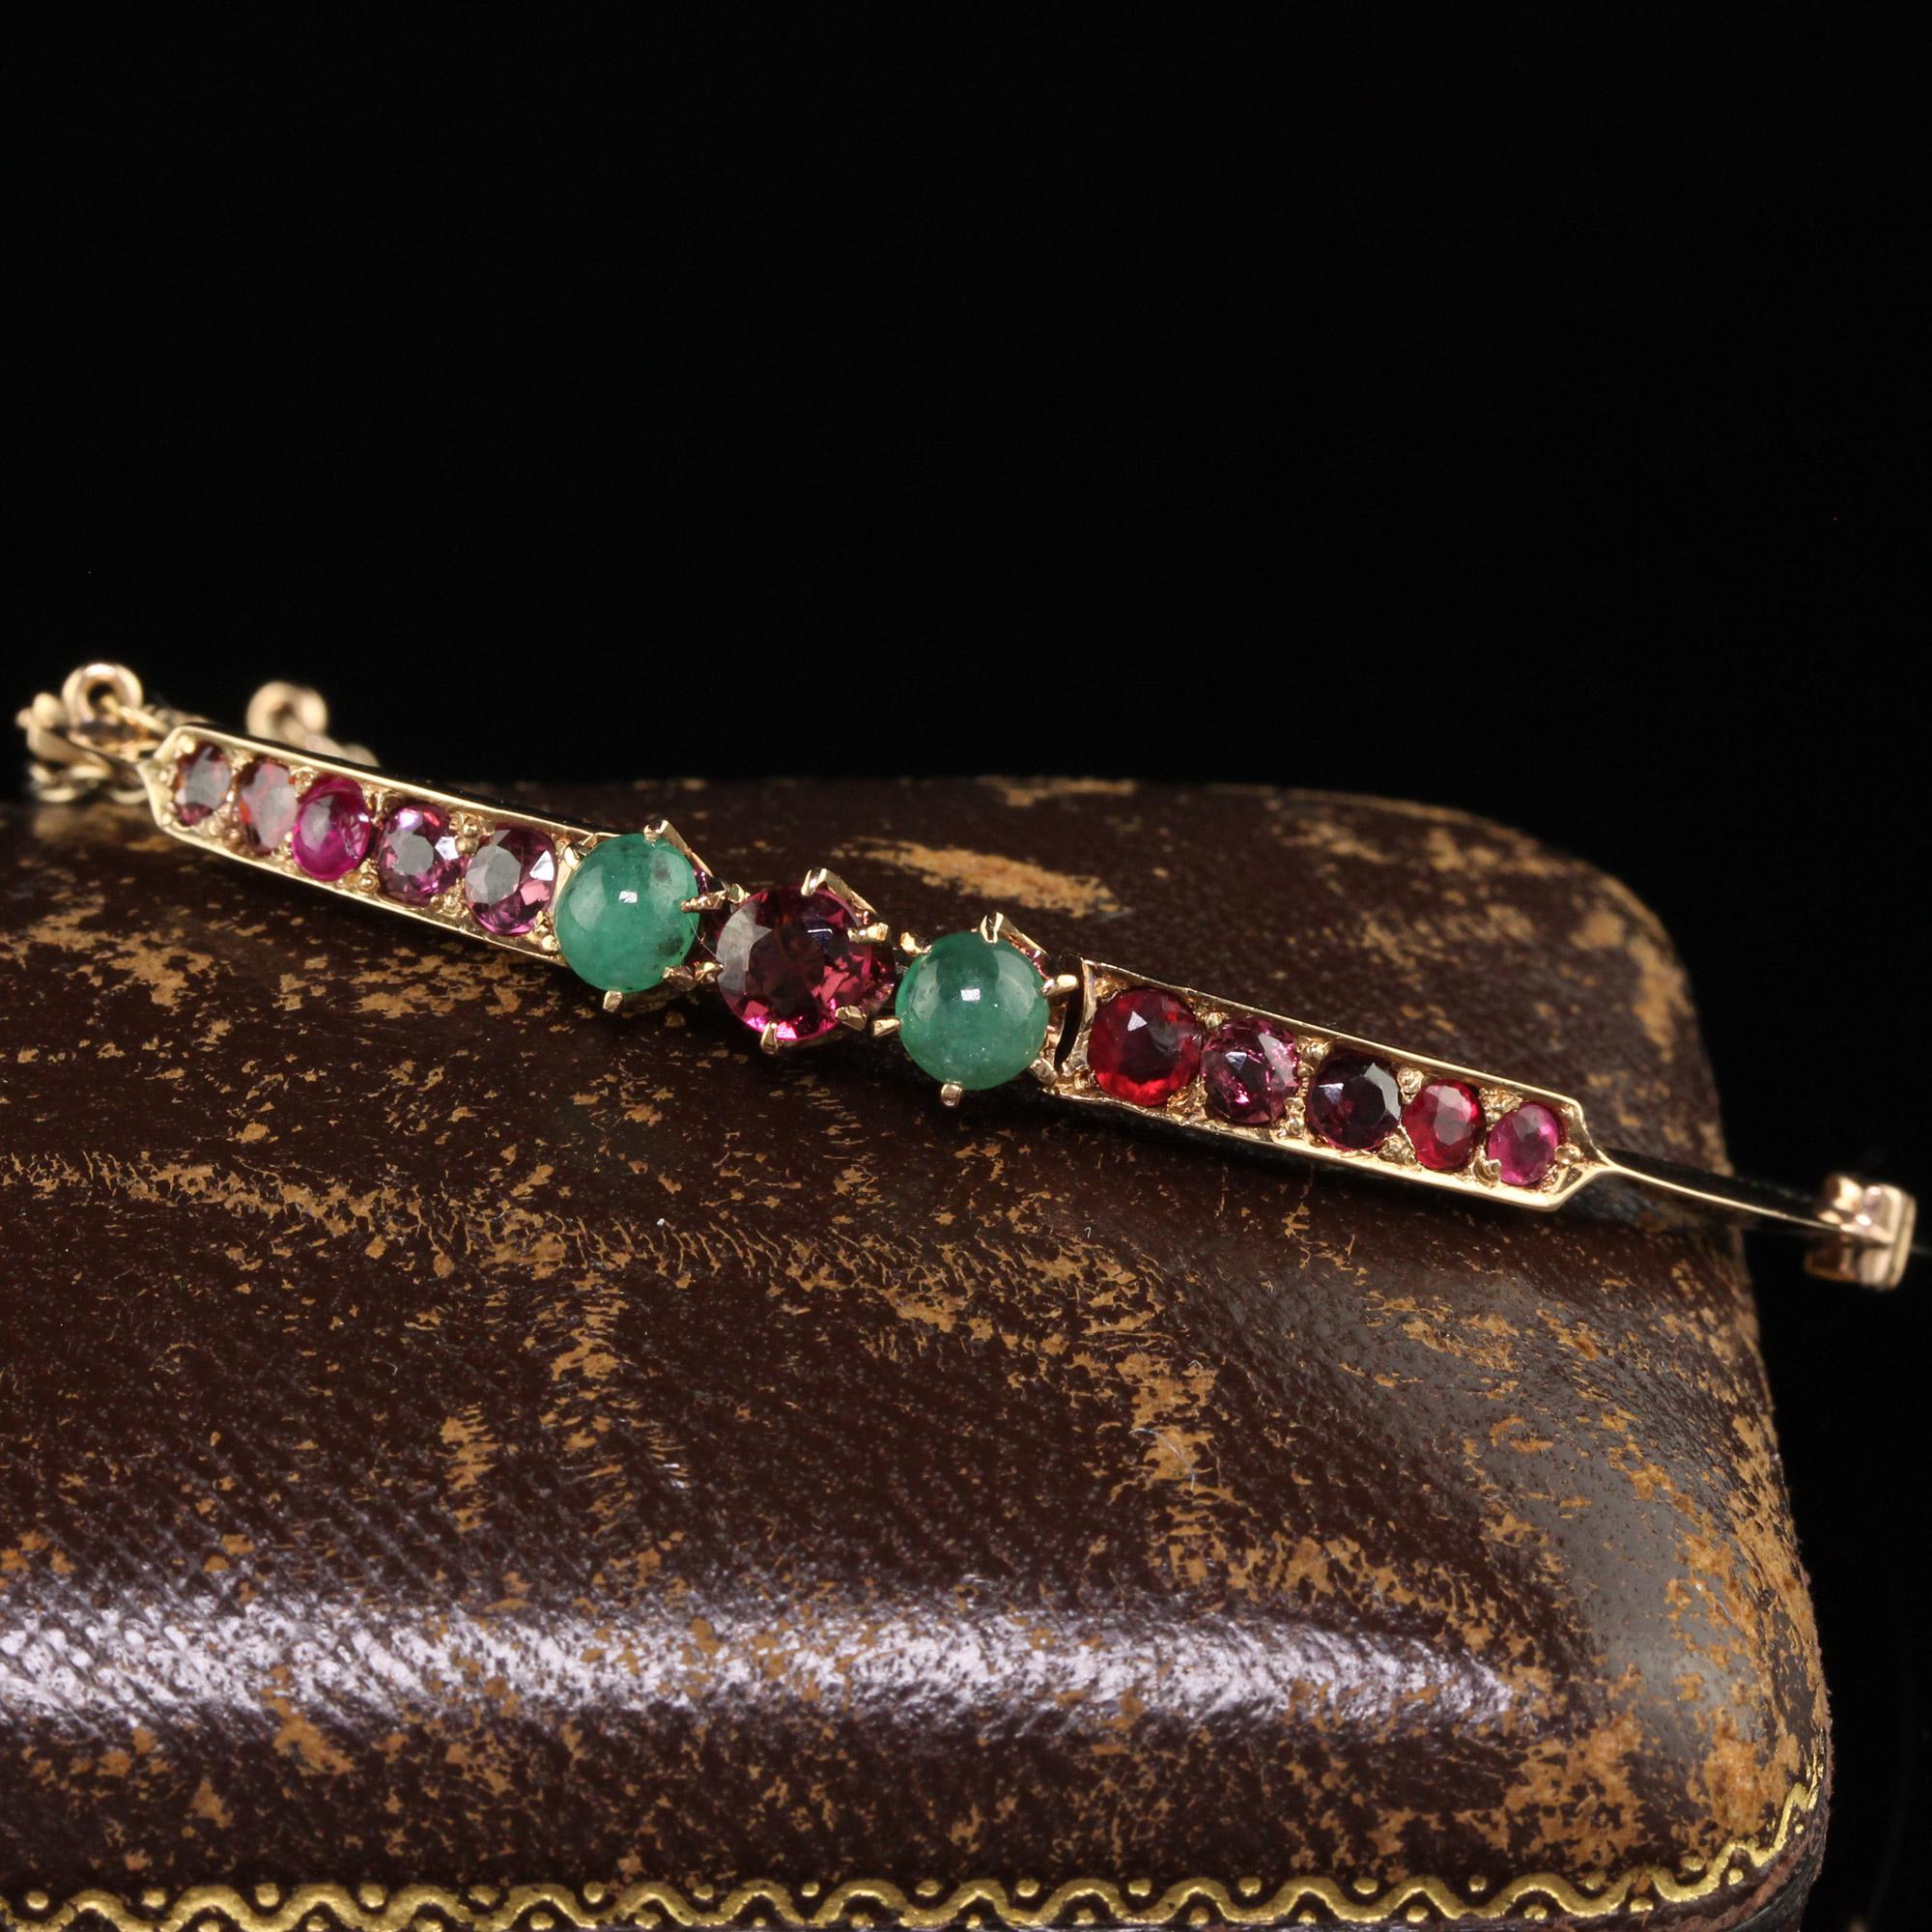 Beautiful Antique Victorian 15K Yellow Gold Garnet and Emerald Bangle Bracelet. This beautiful Victorian bangle bracelet is crafted in 15k yellow gold. The bangle has old cut garnets and two cabochon emeralds set on top of the bangle. The band of